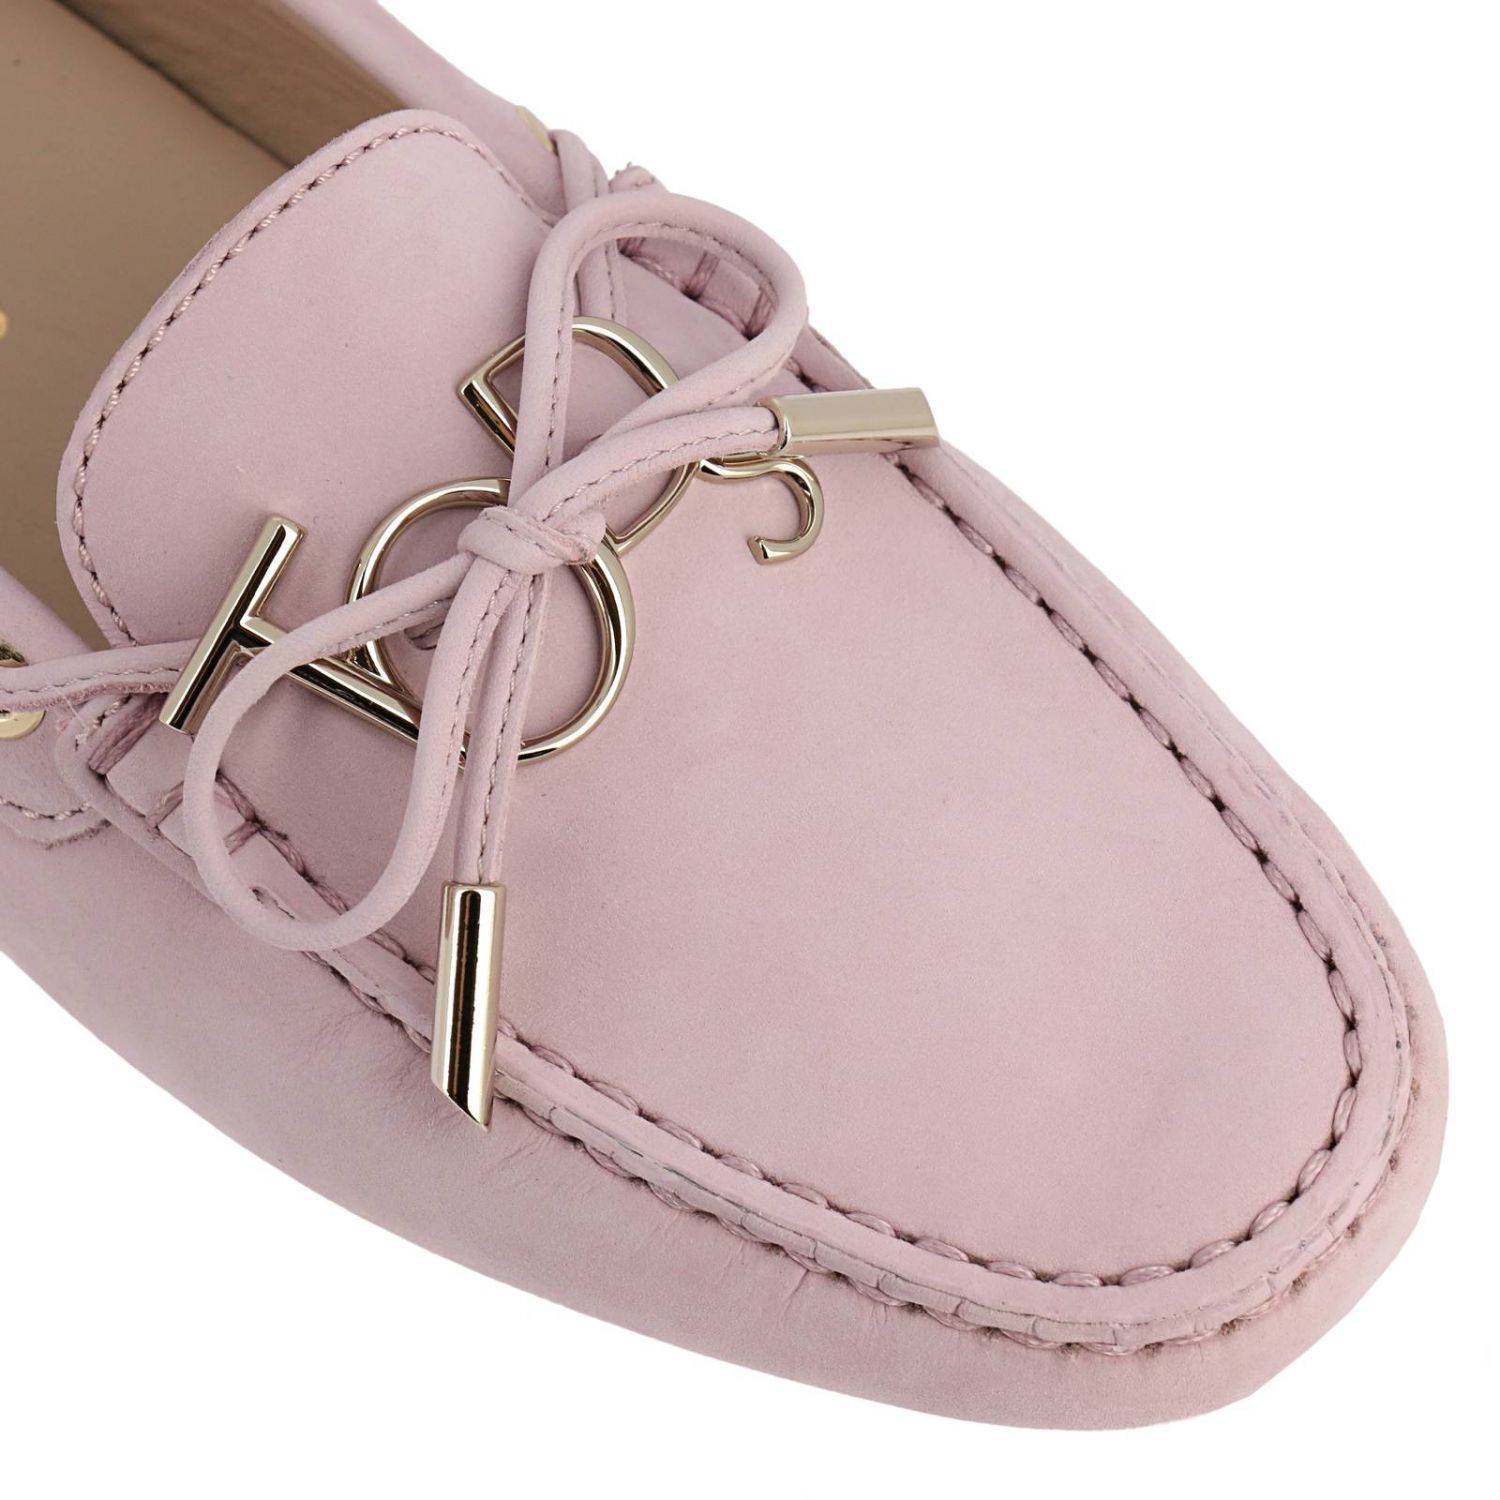 Shoes women Tod's | Loafers Tods Women Pink | Loafers Tods XXW0FW0X710 ...